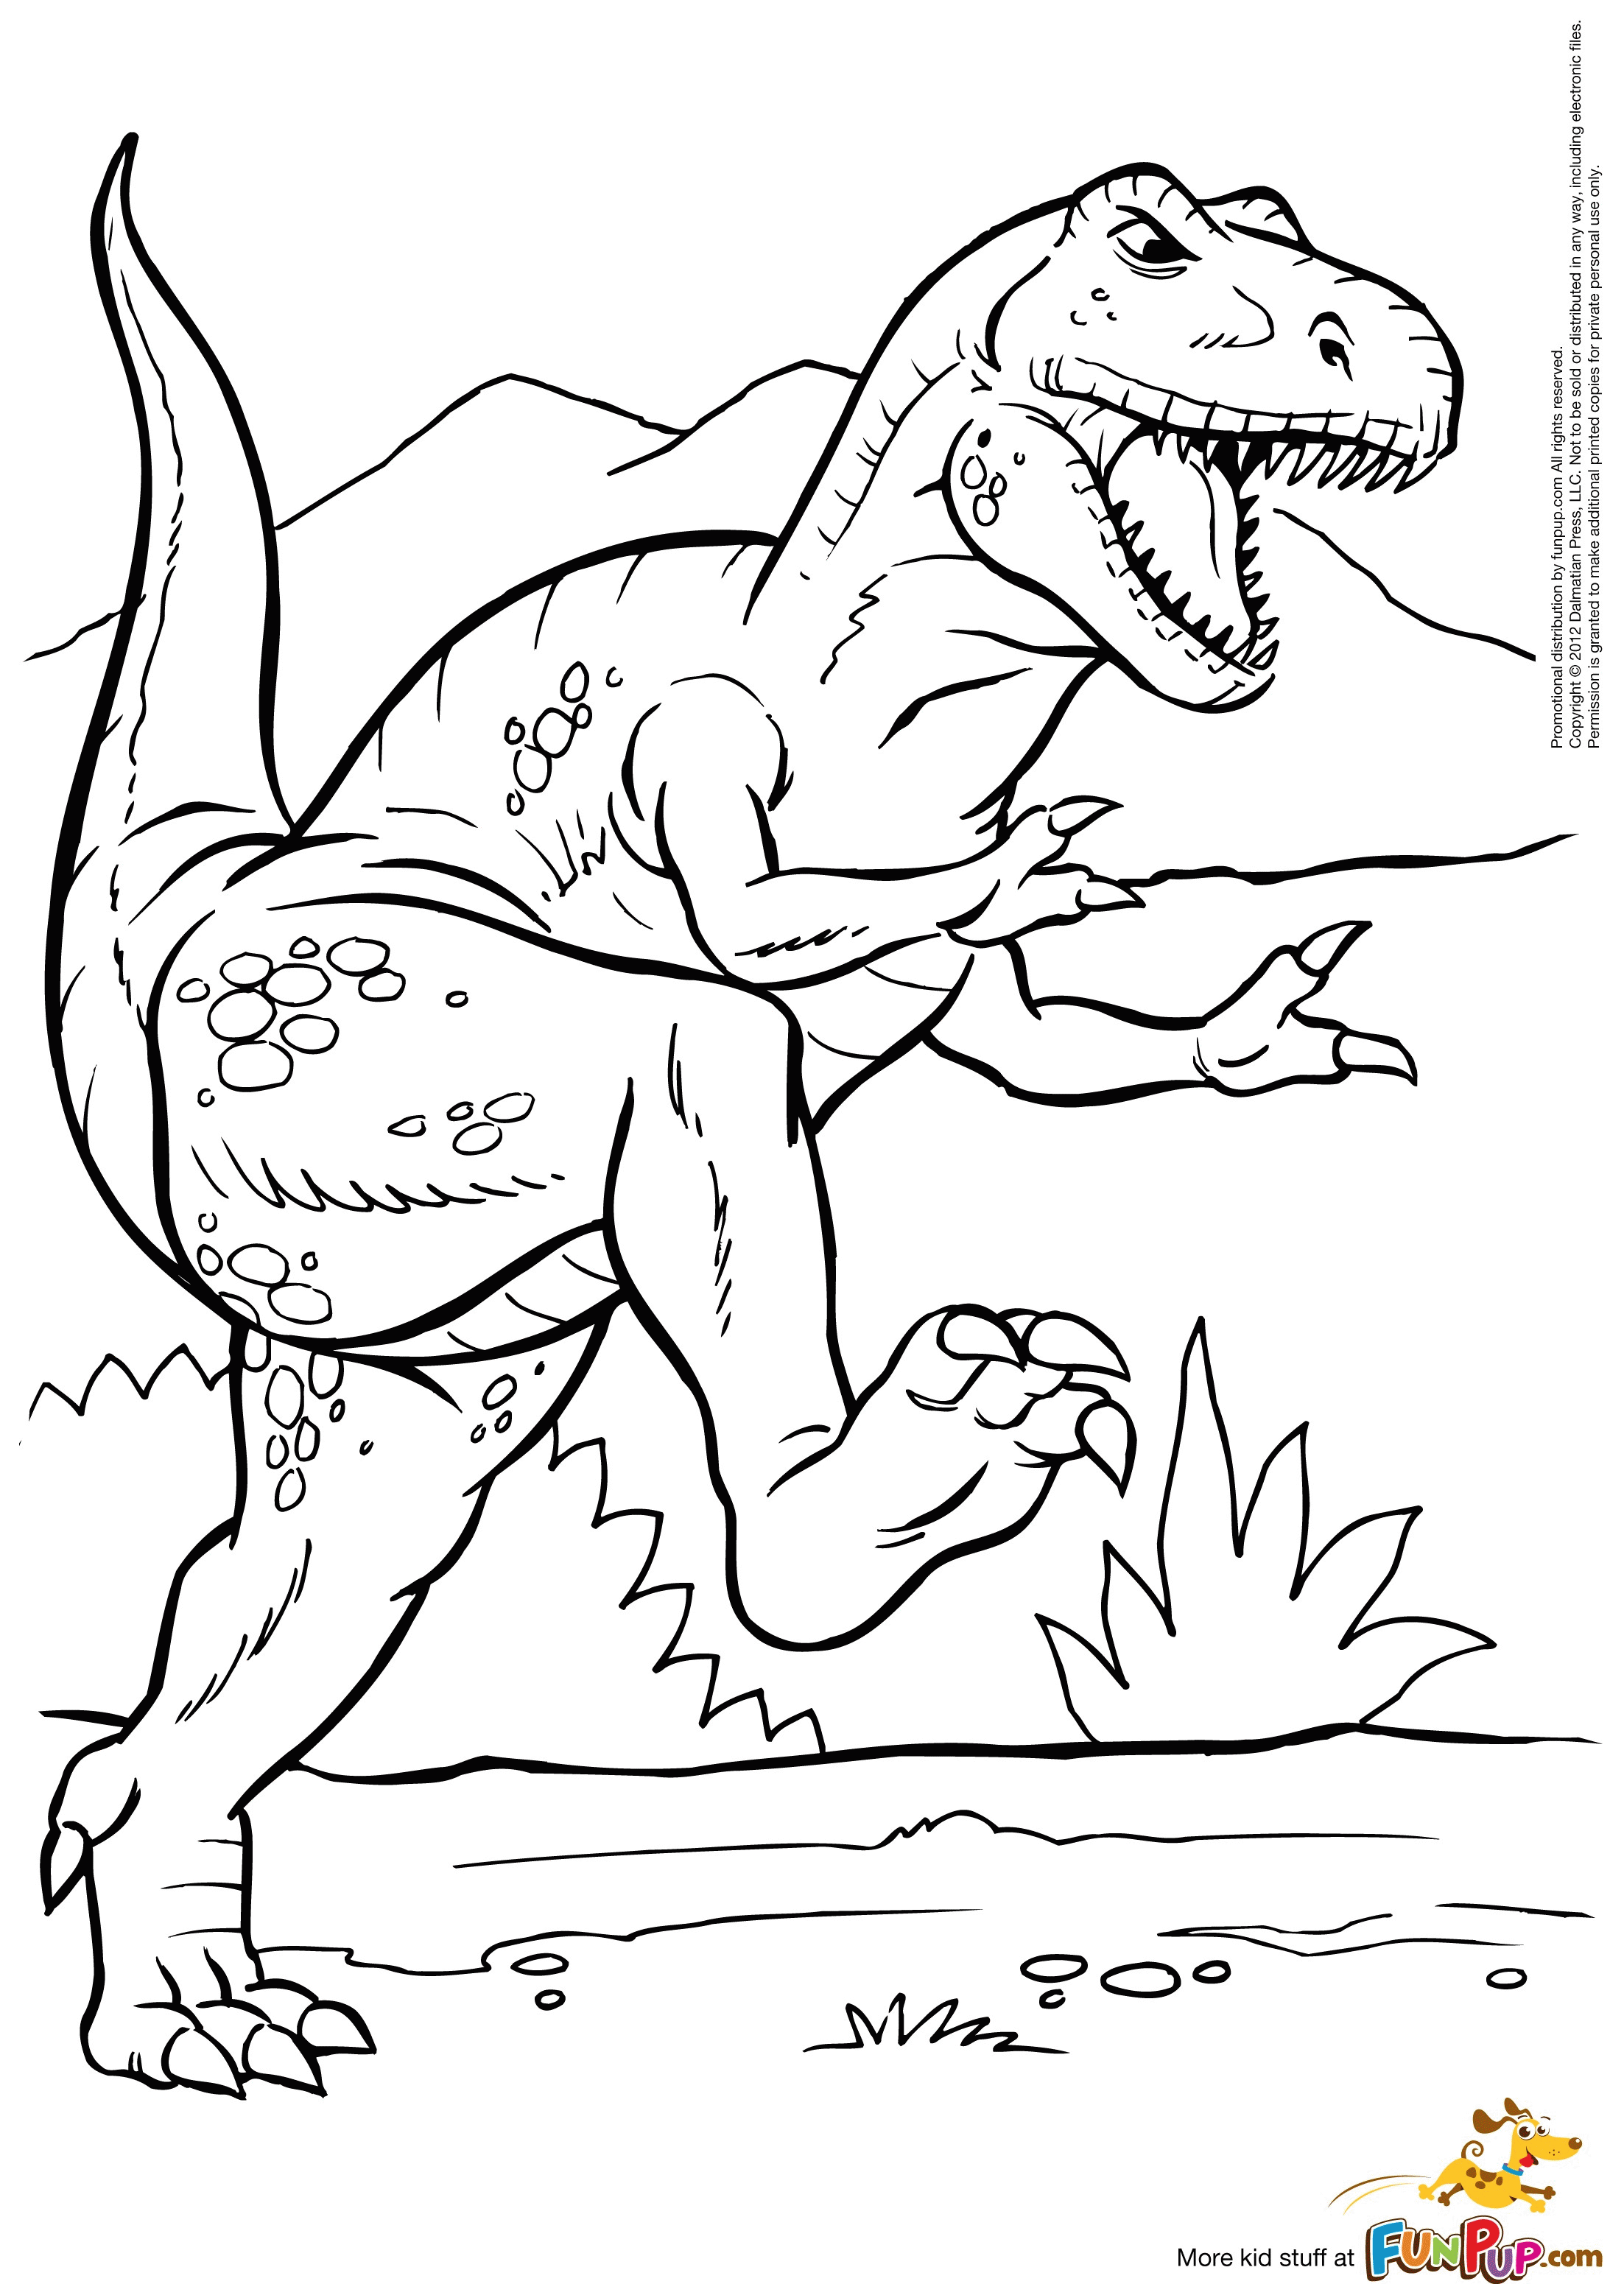 Cute T rex Coloring Page   Coloring Home